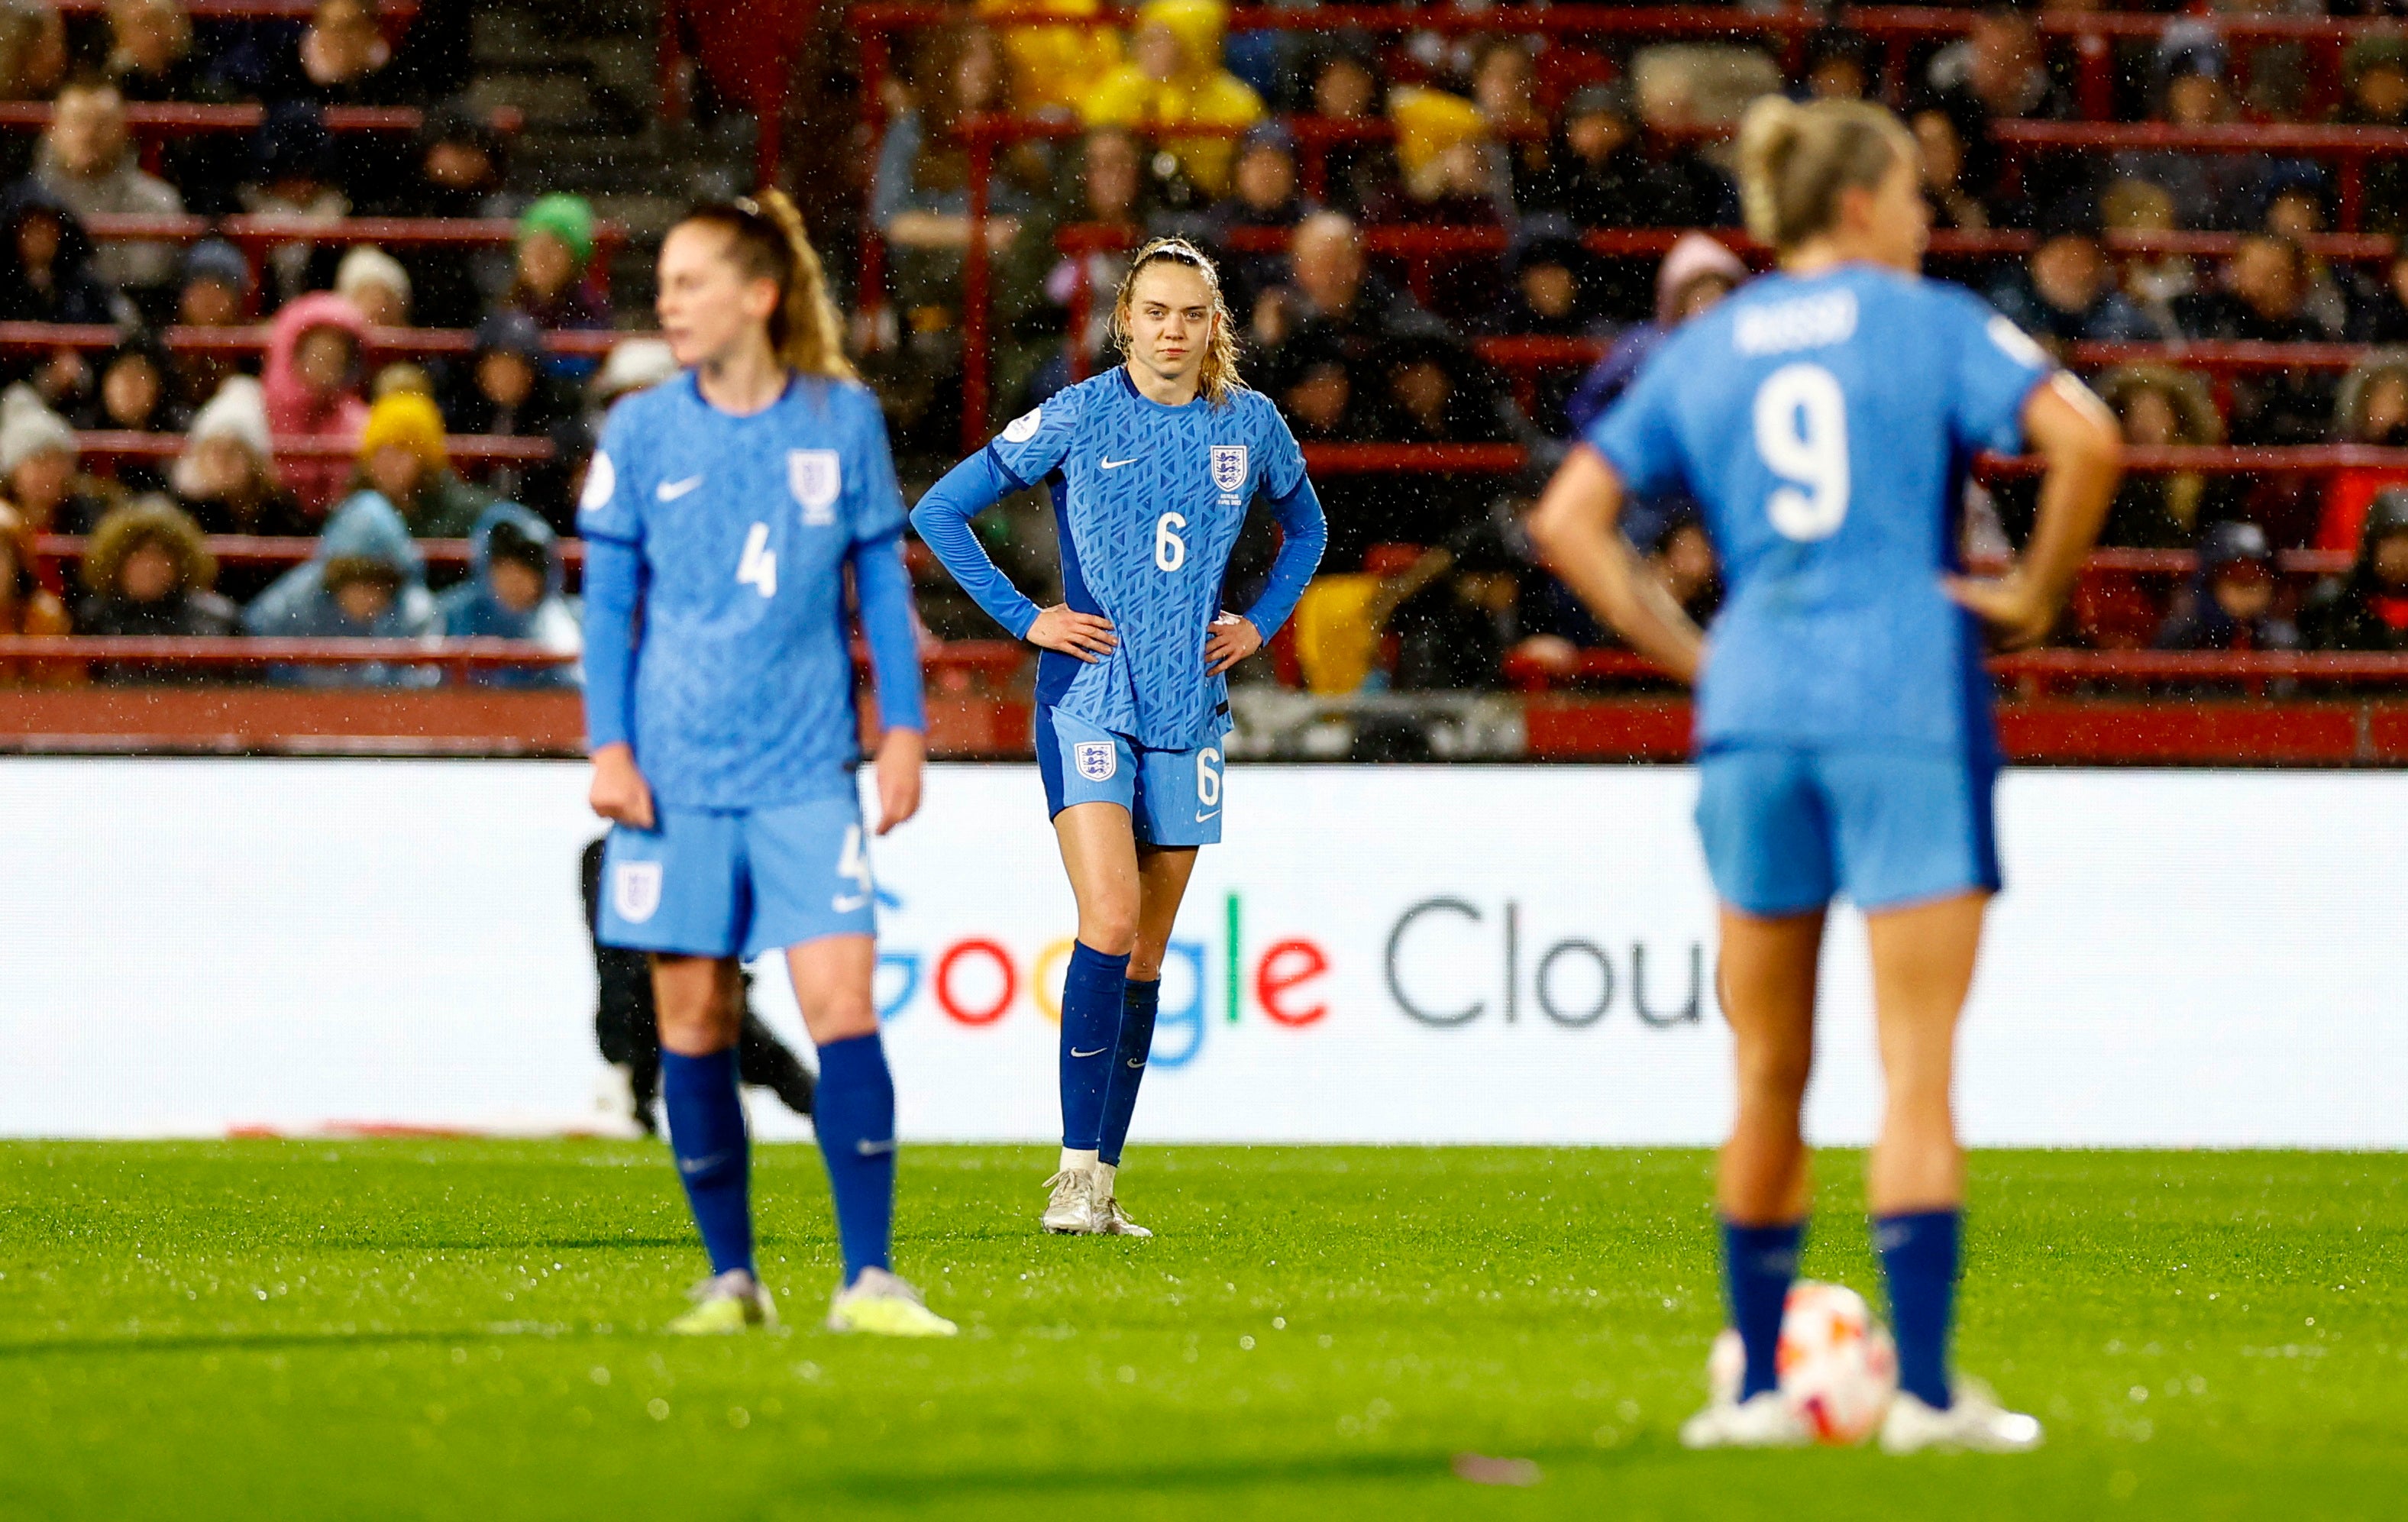 England slipped to a first defeat under Sarina Wiegman